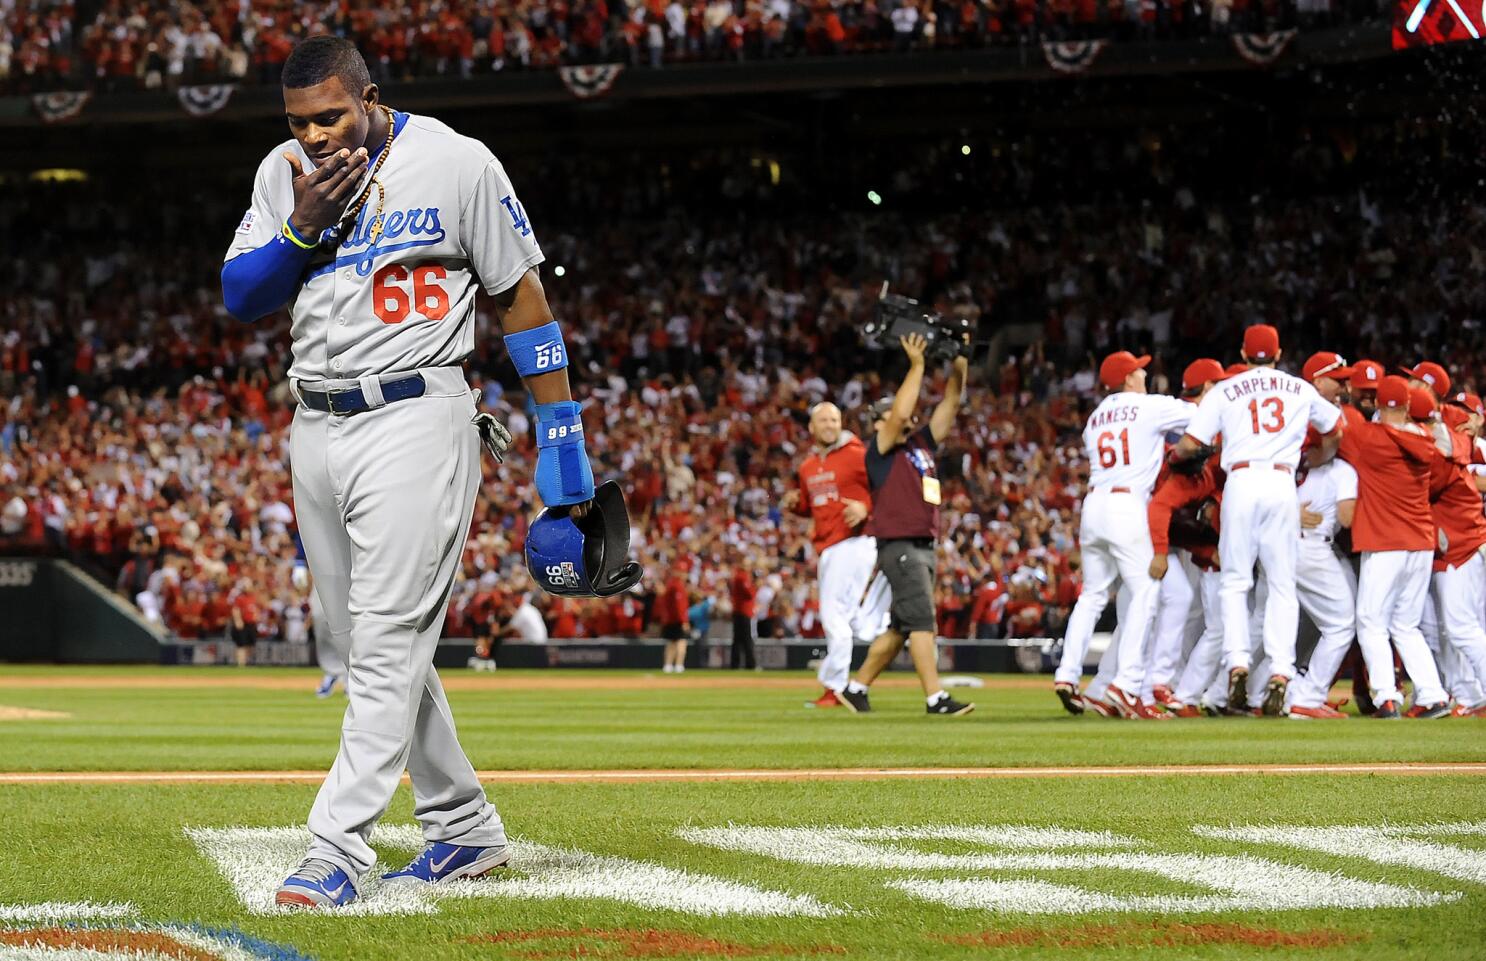 Dodgers have fun with Yasiel Puig's naked photos